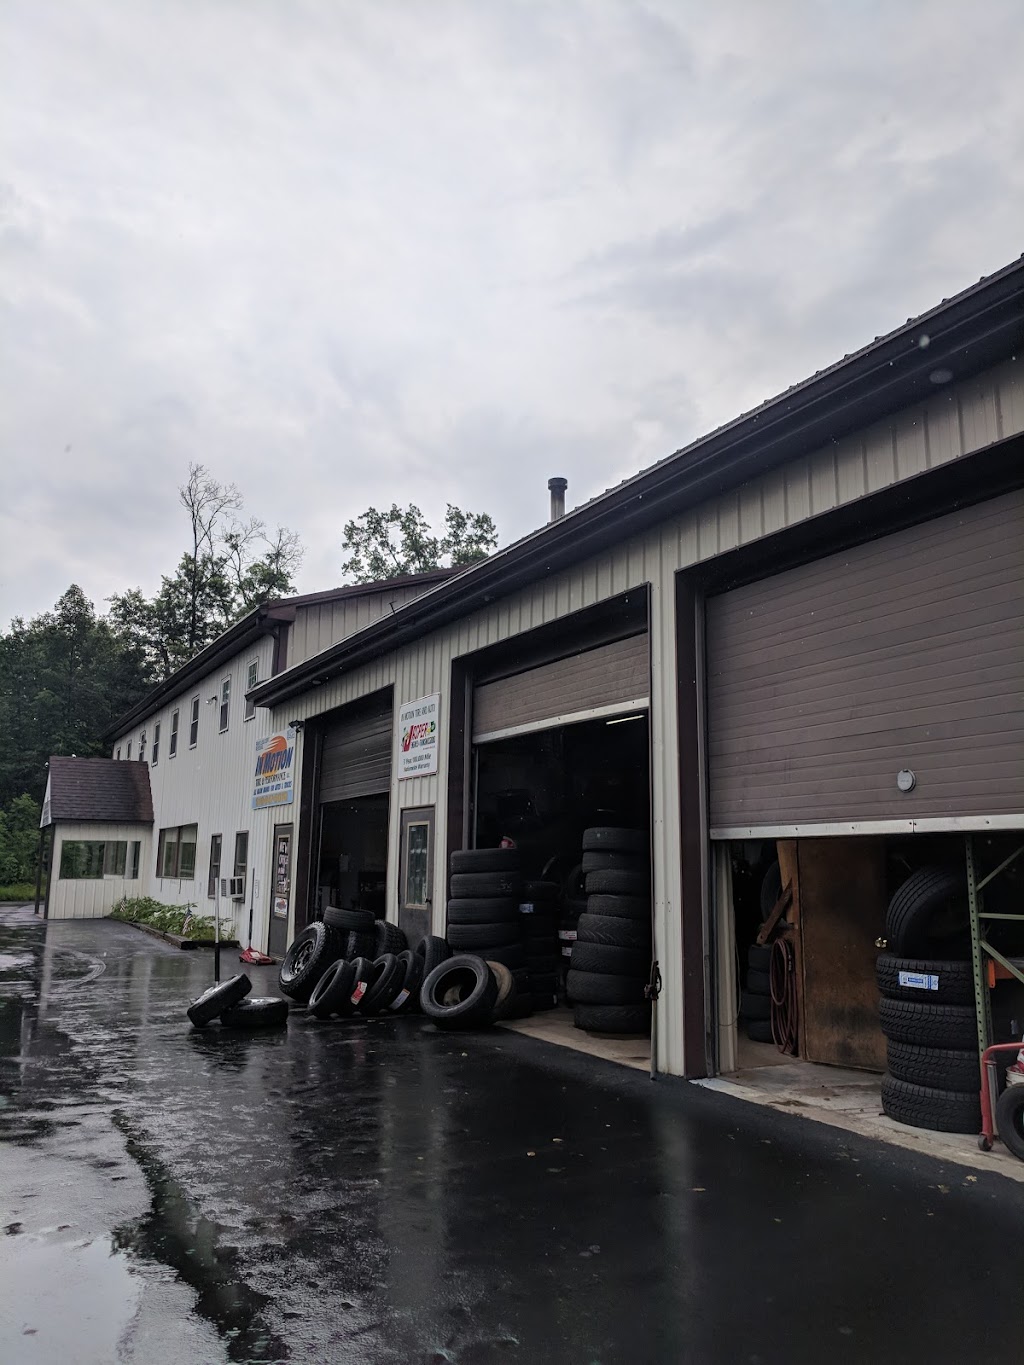 In Motion Tire & Performance | 8044 Easton Rd, Ottsville, PA 18942 | Phone: (610) 847-5010